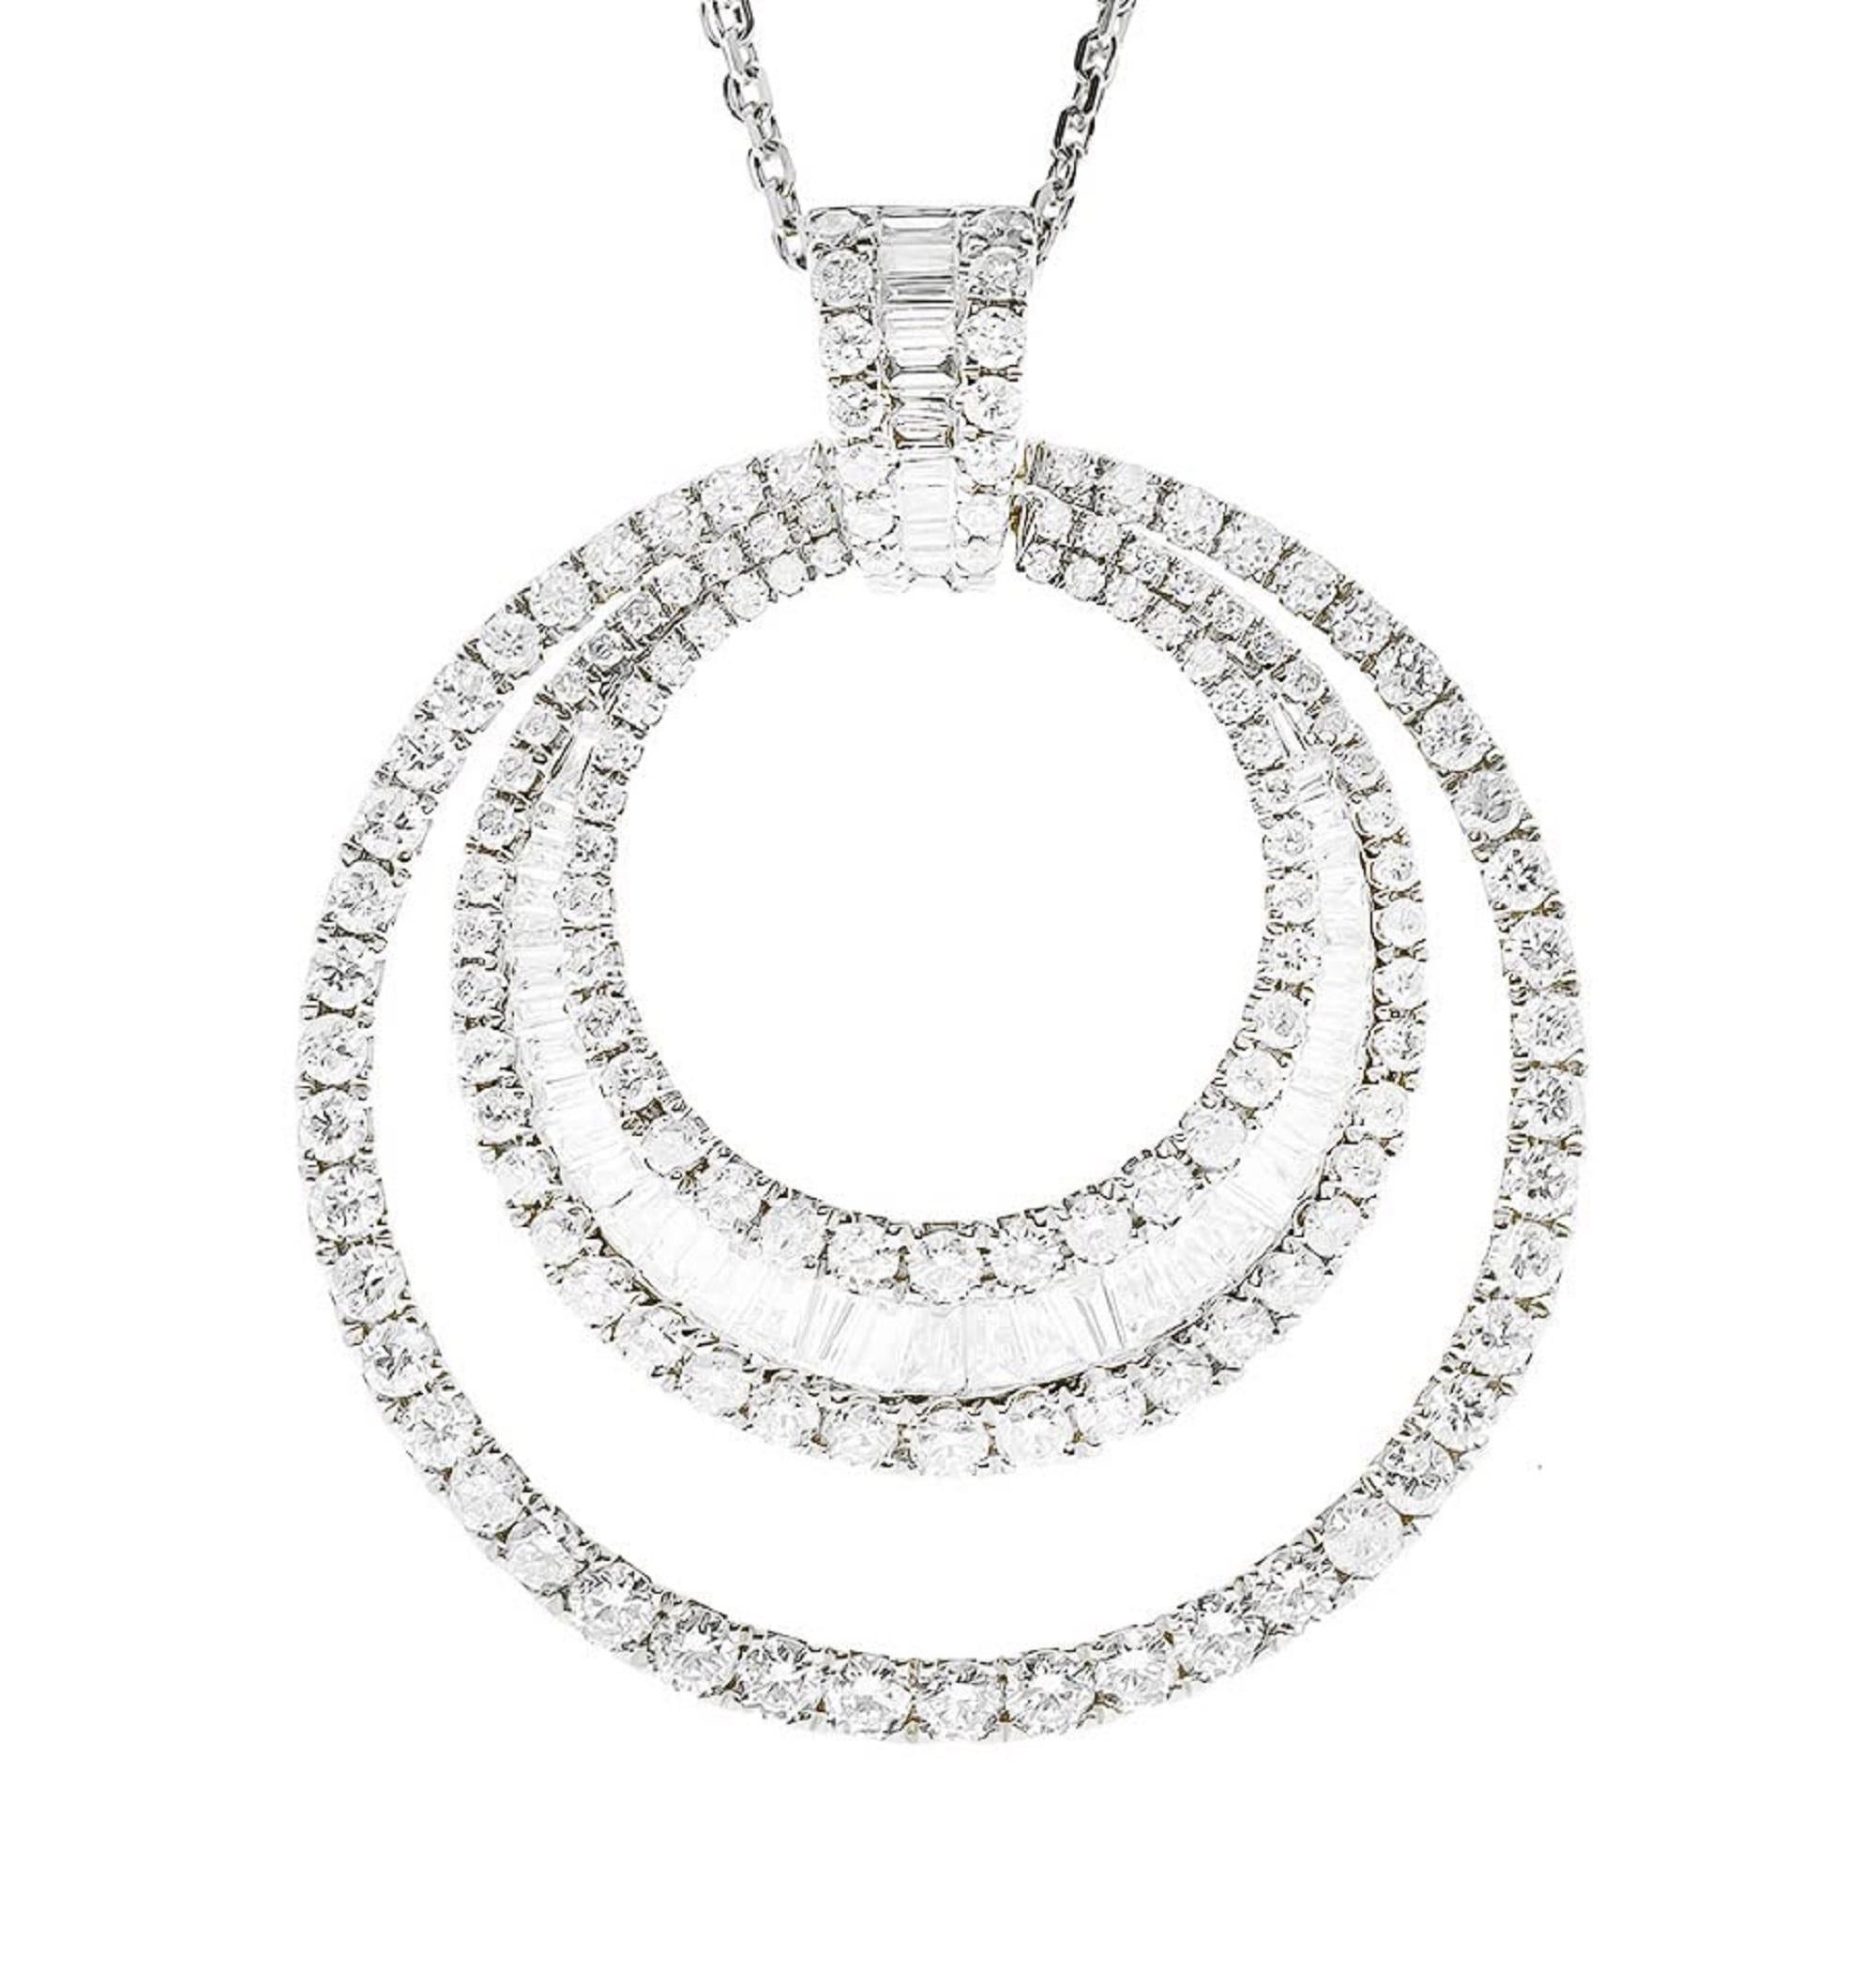 Decorate yourself in elegance with this Pendant is crafted from 14-karat White Gold by Gin & Grace. This Pendant is Baguette-cut White Diamond (49 Pcs) 0.55 Carat and Round-cut White Diamond (145 Pcs) 1.50 Carat. This Pendant is weight 3.18 grams